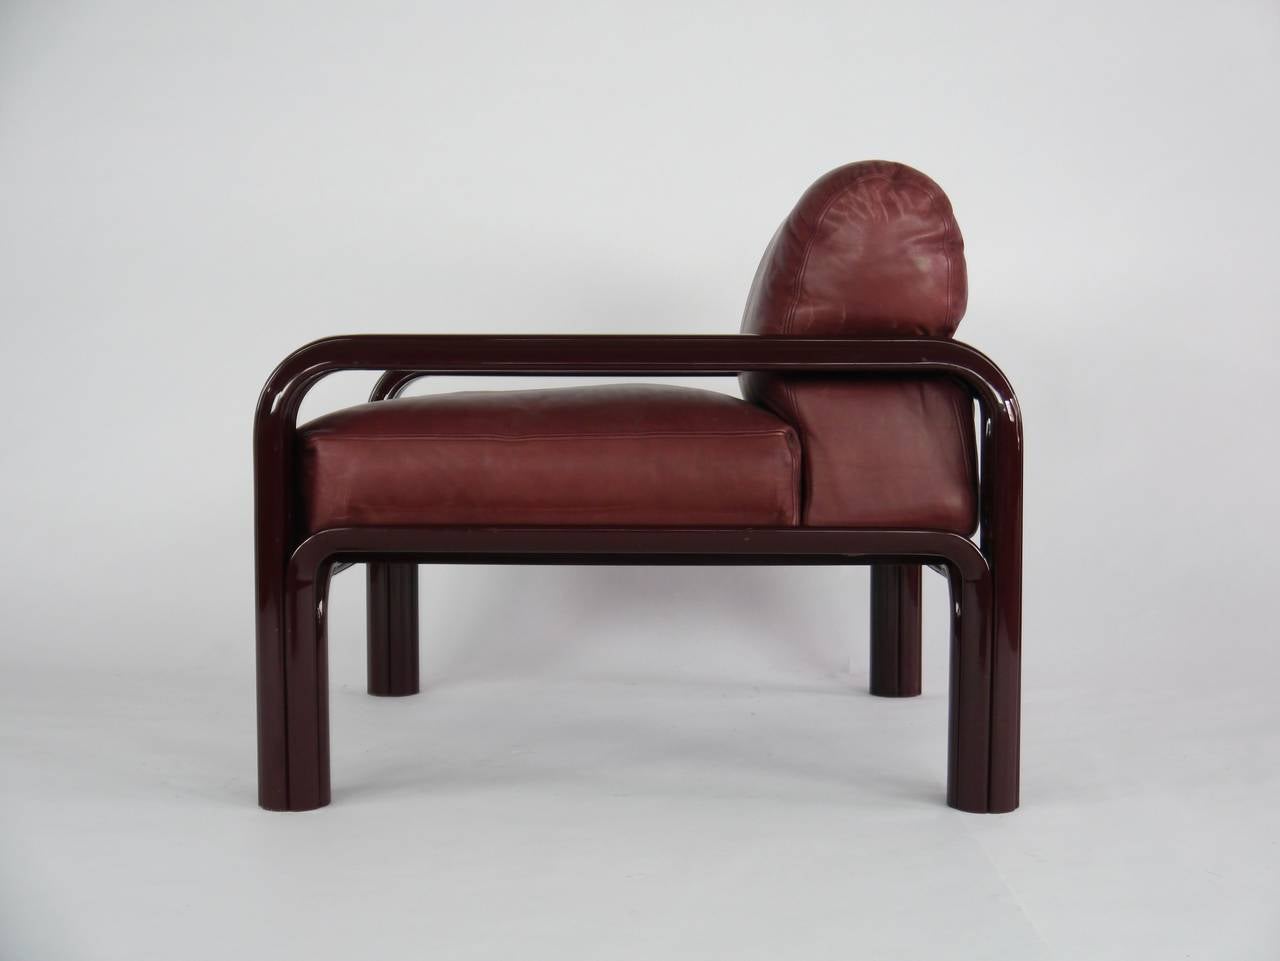 Late 20th Century Lounge chairs in Oxblood leather by Gae Aulenti for Knoll